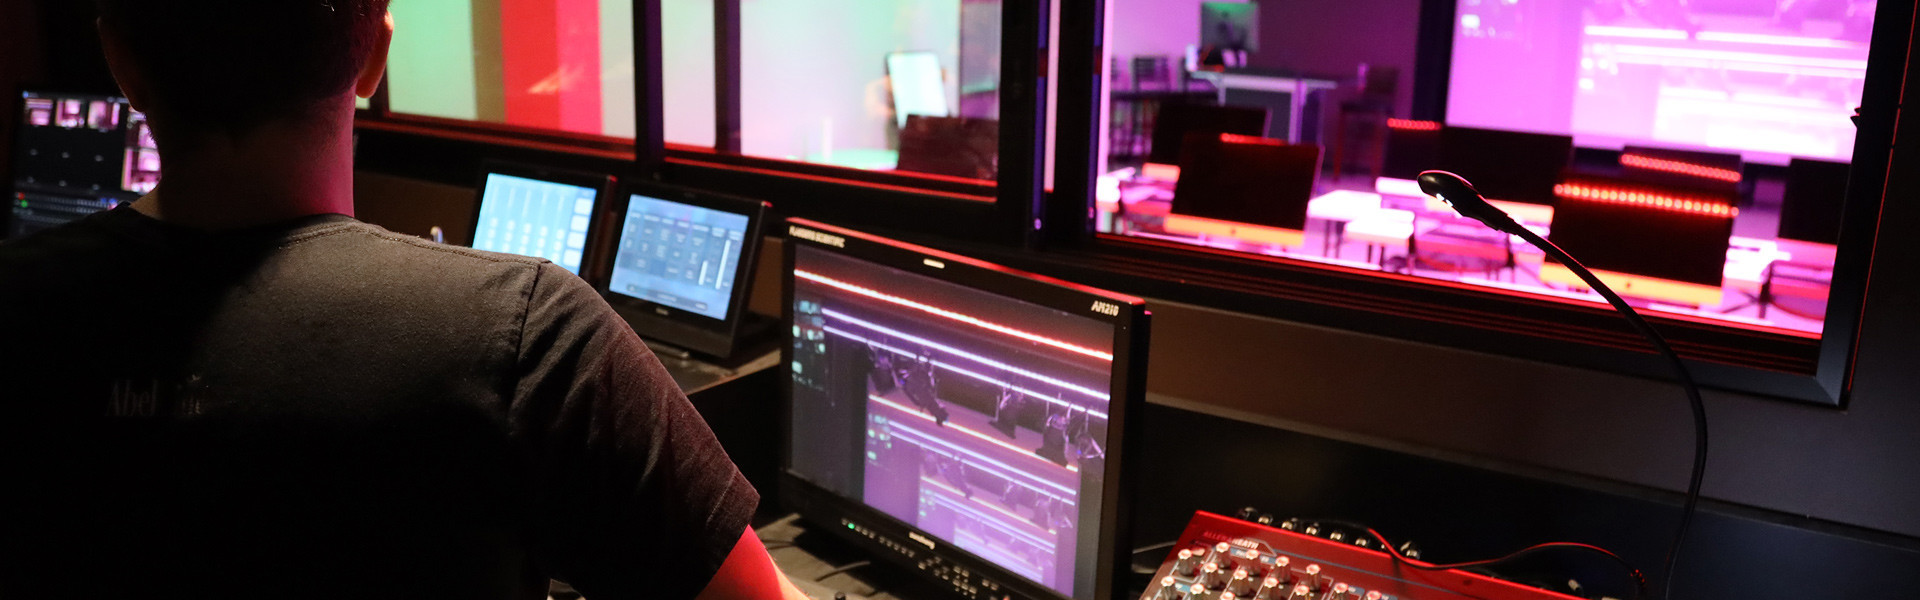 Header image for article Live Stream Classes at AbelCine